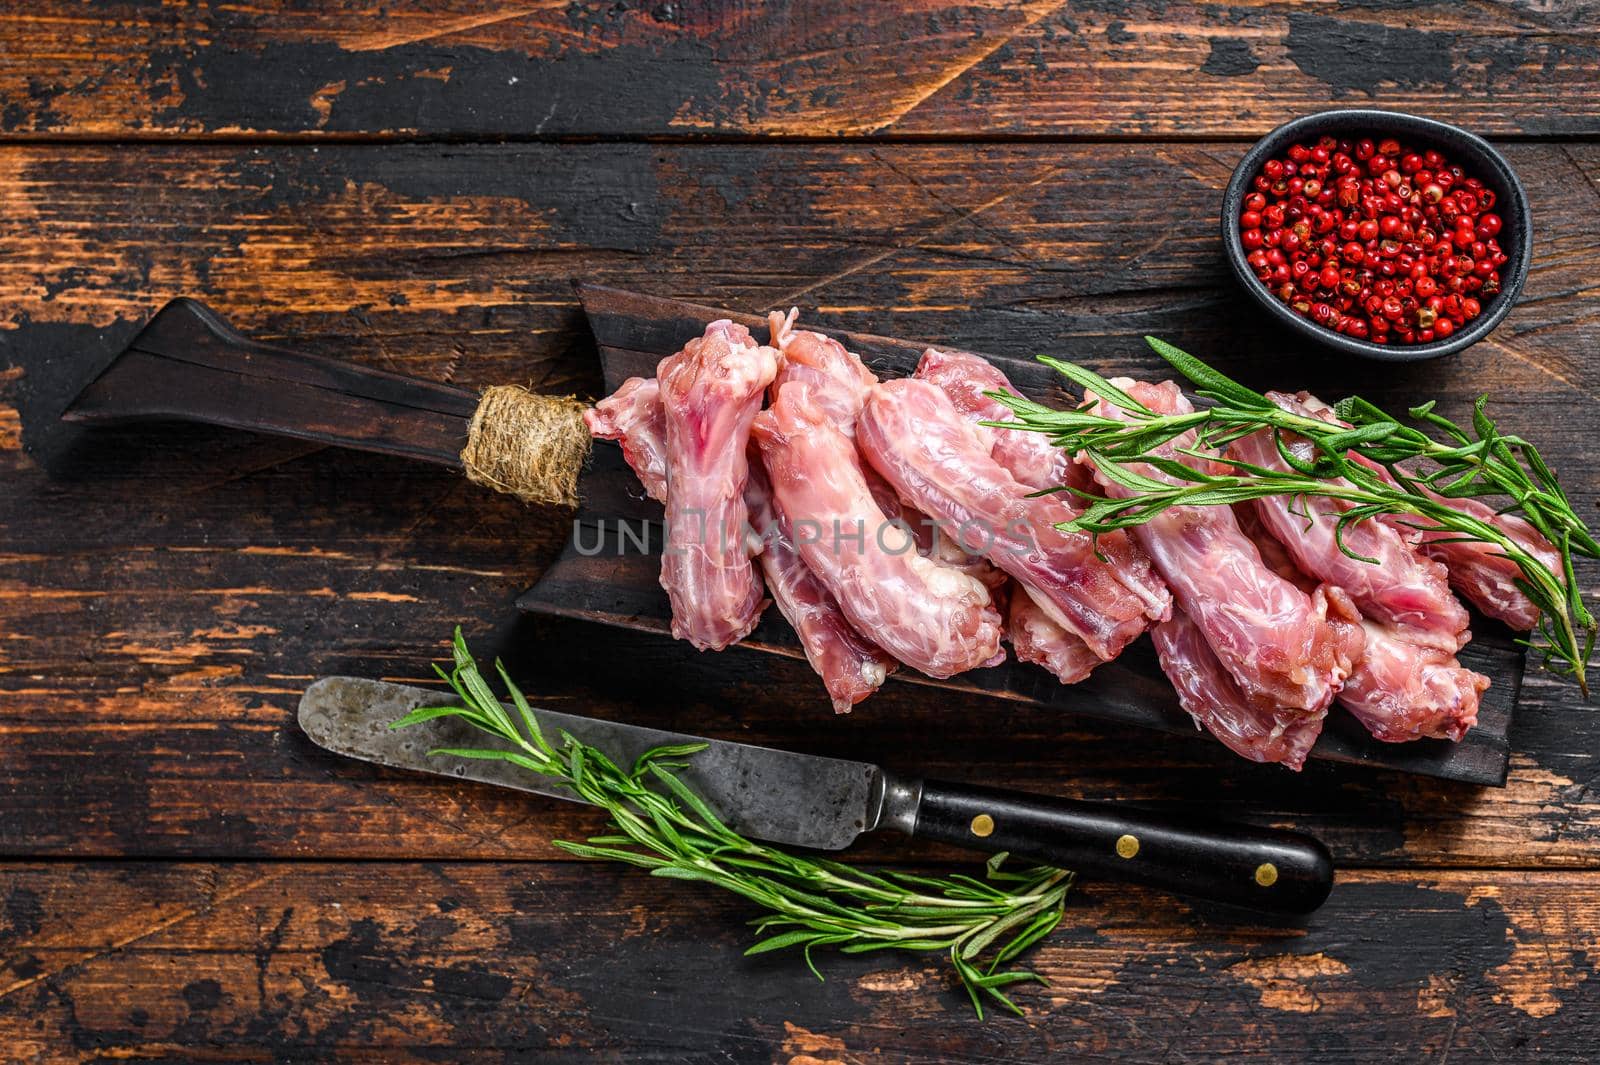 Chicken neck meat on a cutting board. Wooden background. Top view by Composter